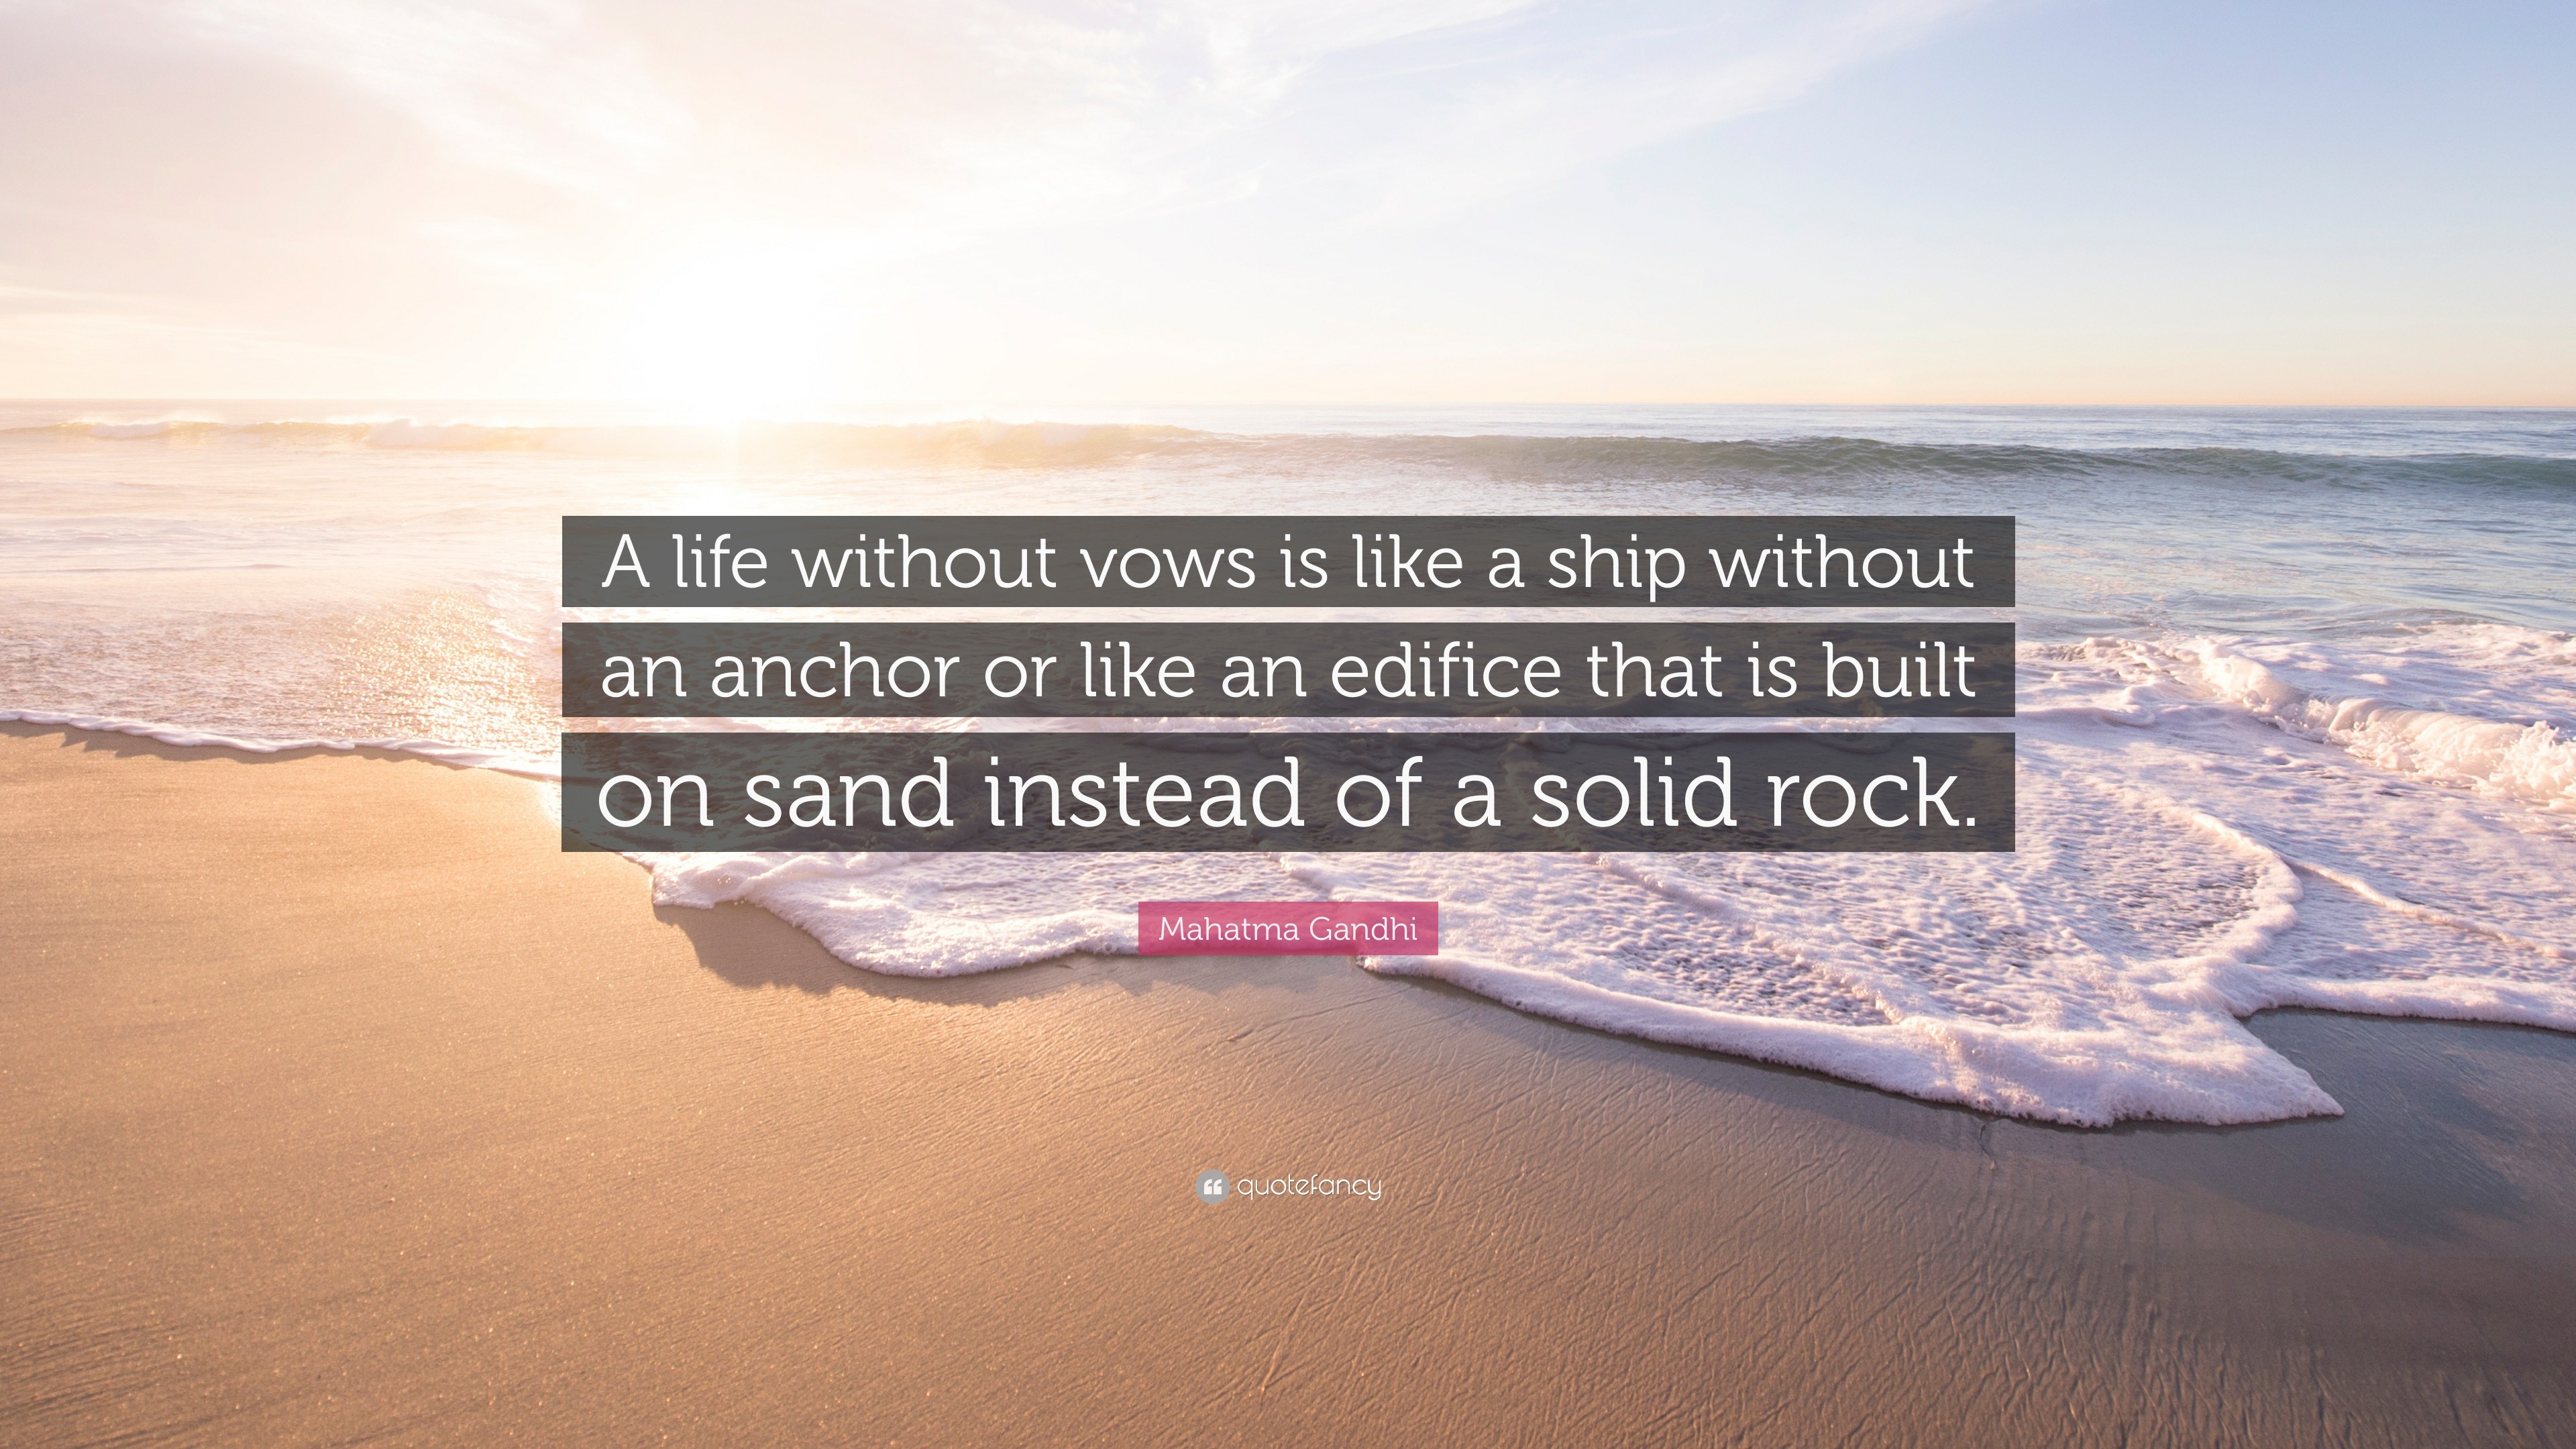 Mahatma Gandhi Quote “A life without vows is like a ship without an anchor